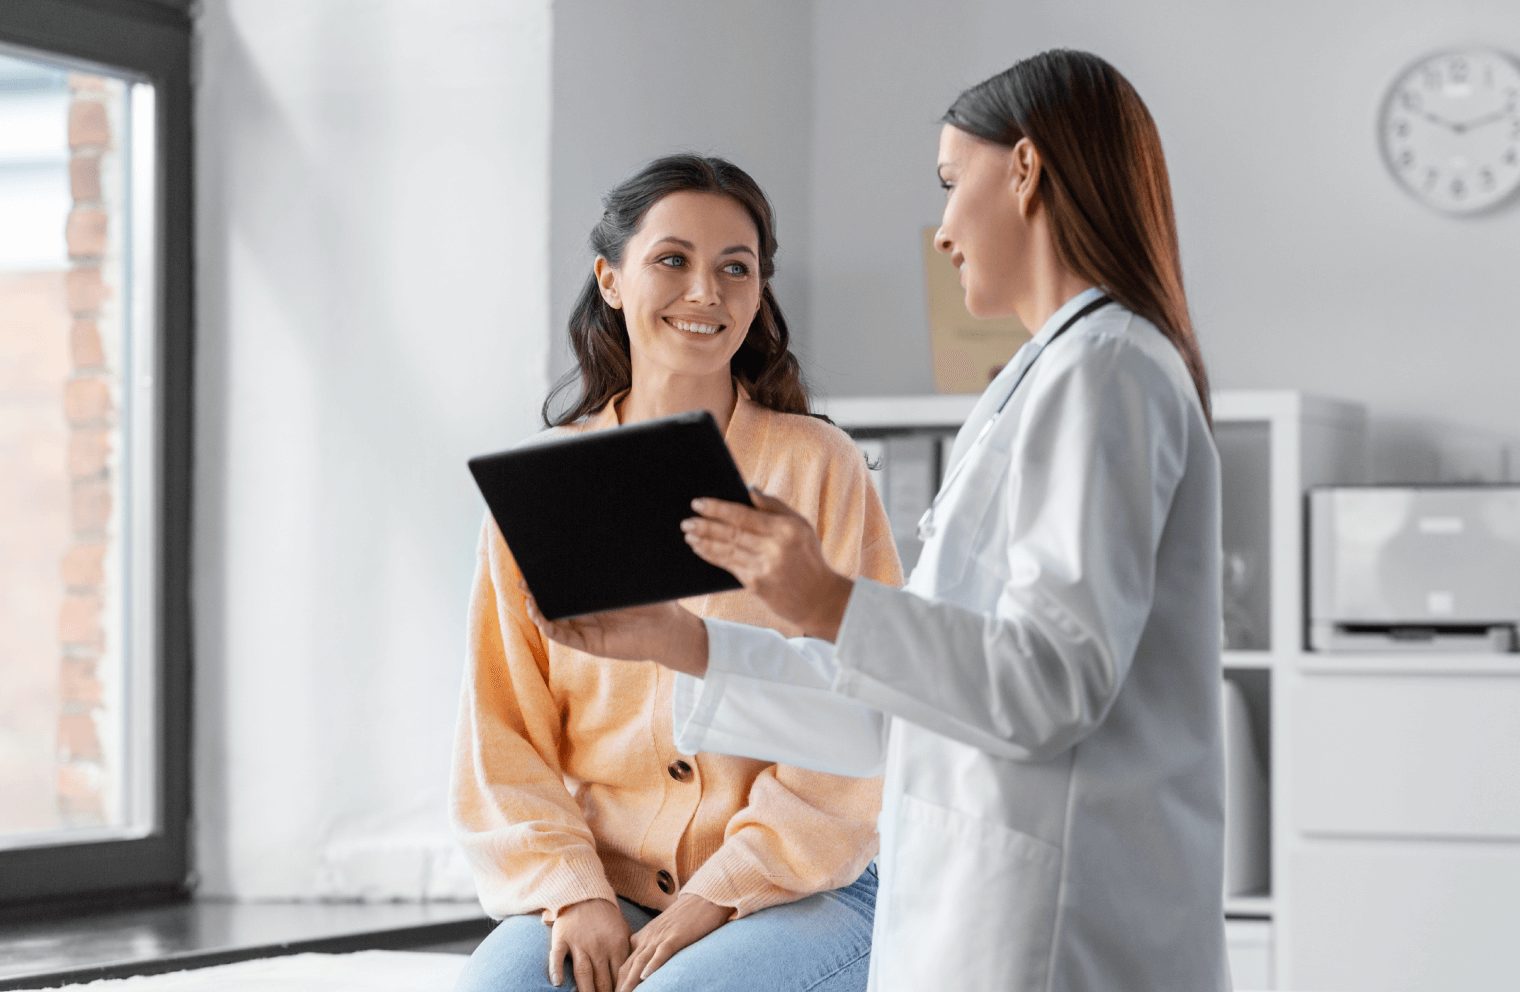 Picture of a doctor holding a tablet while discussing something with her patient.